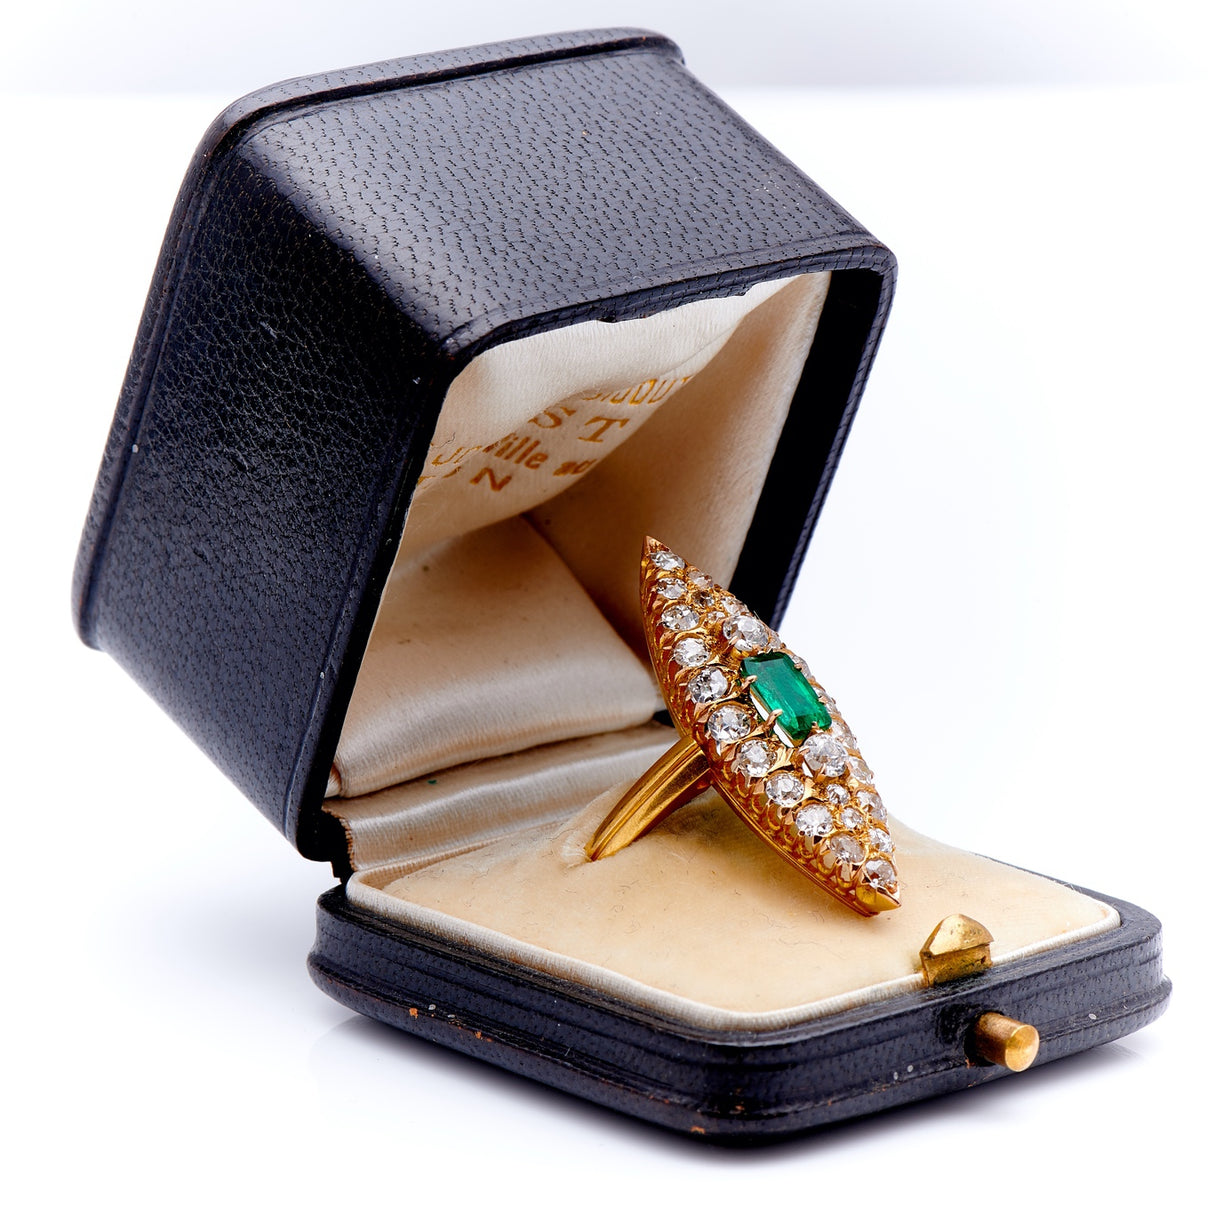 Belle Époque, French, Emerald and Diamond Marquise Cluster Ring, Original Box